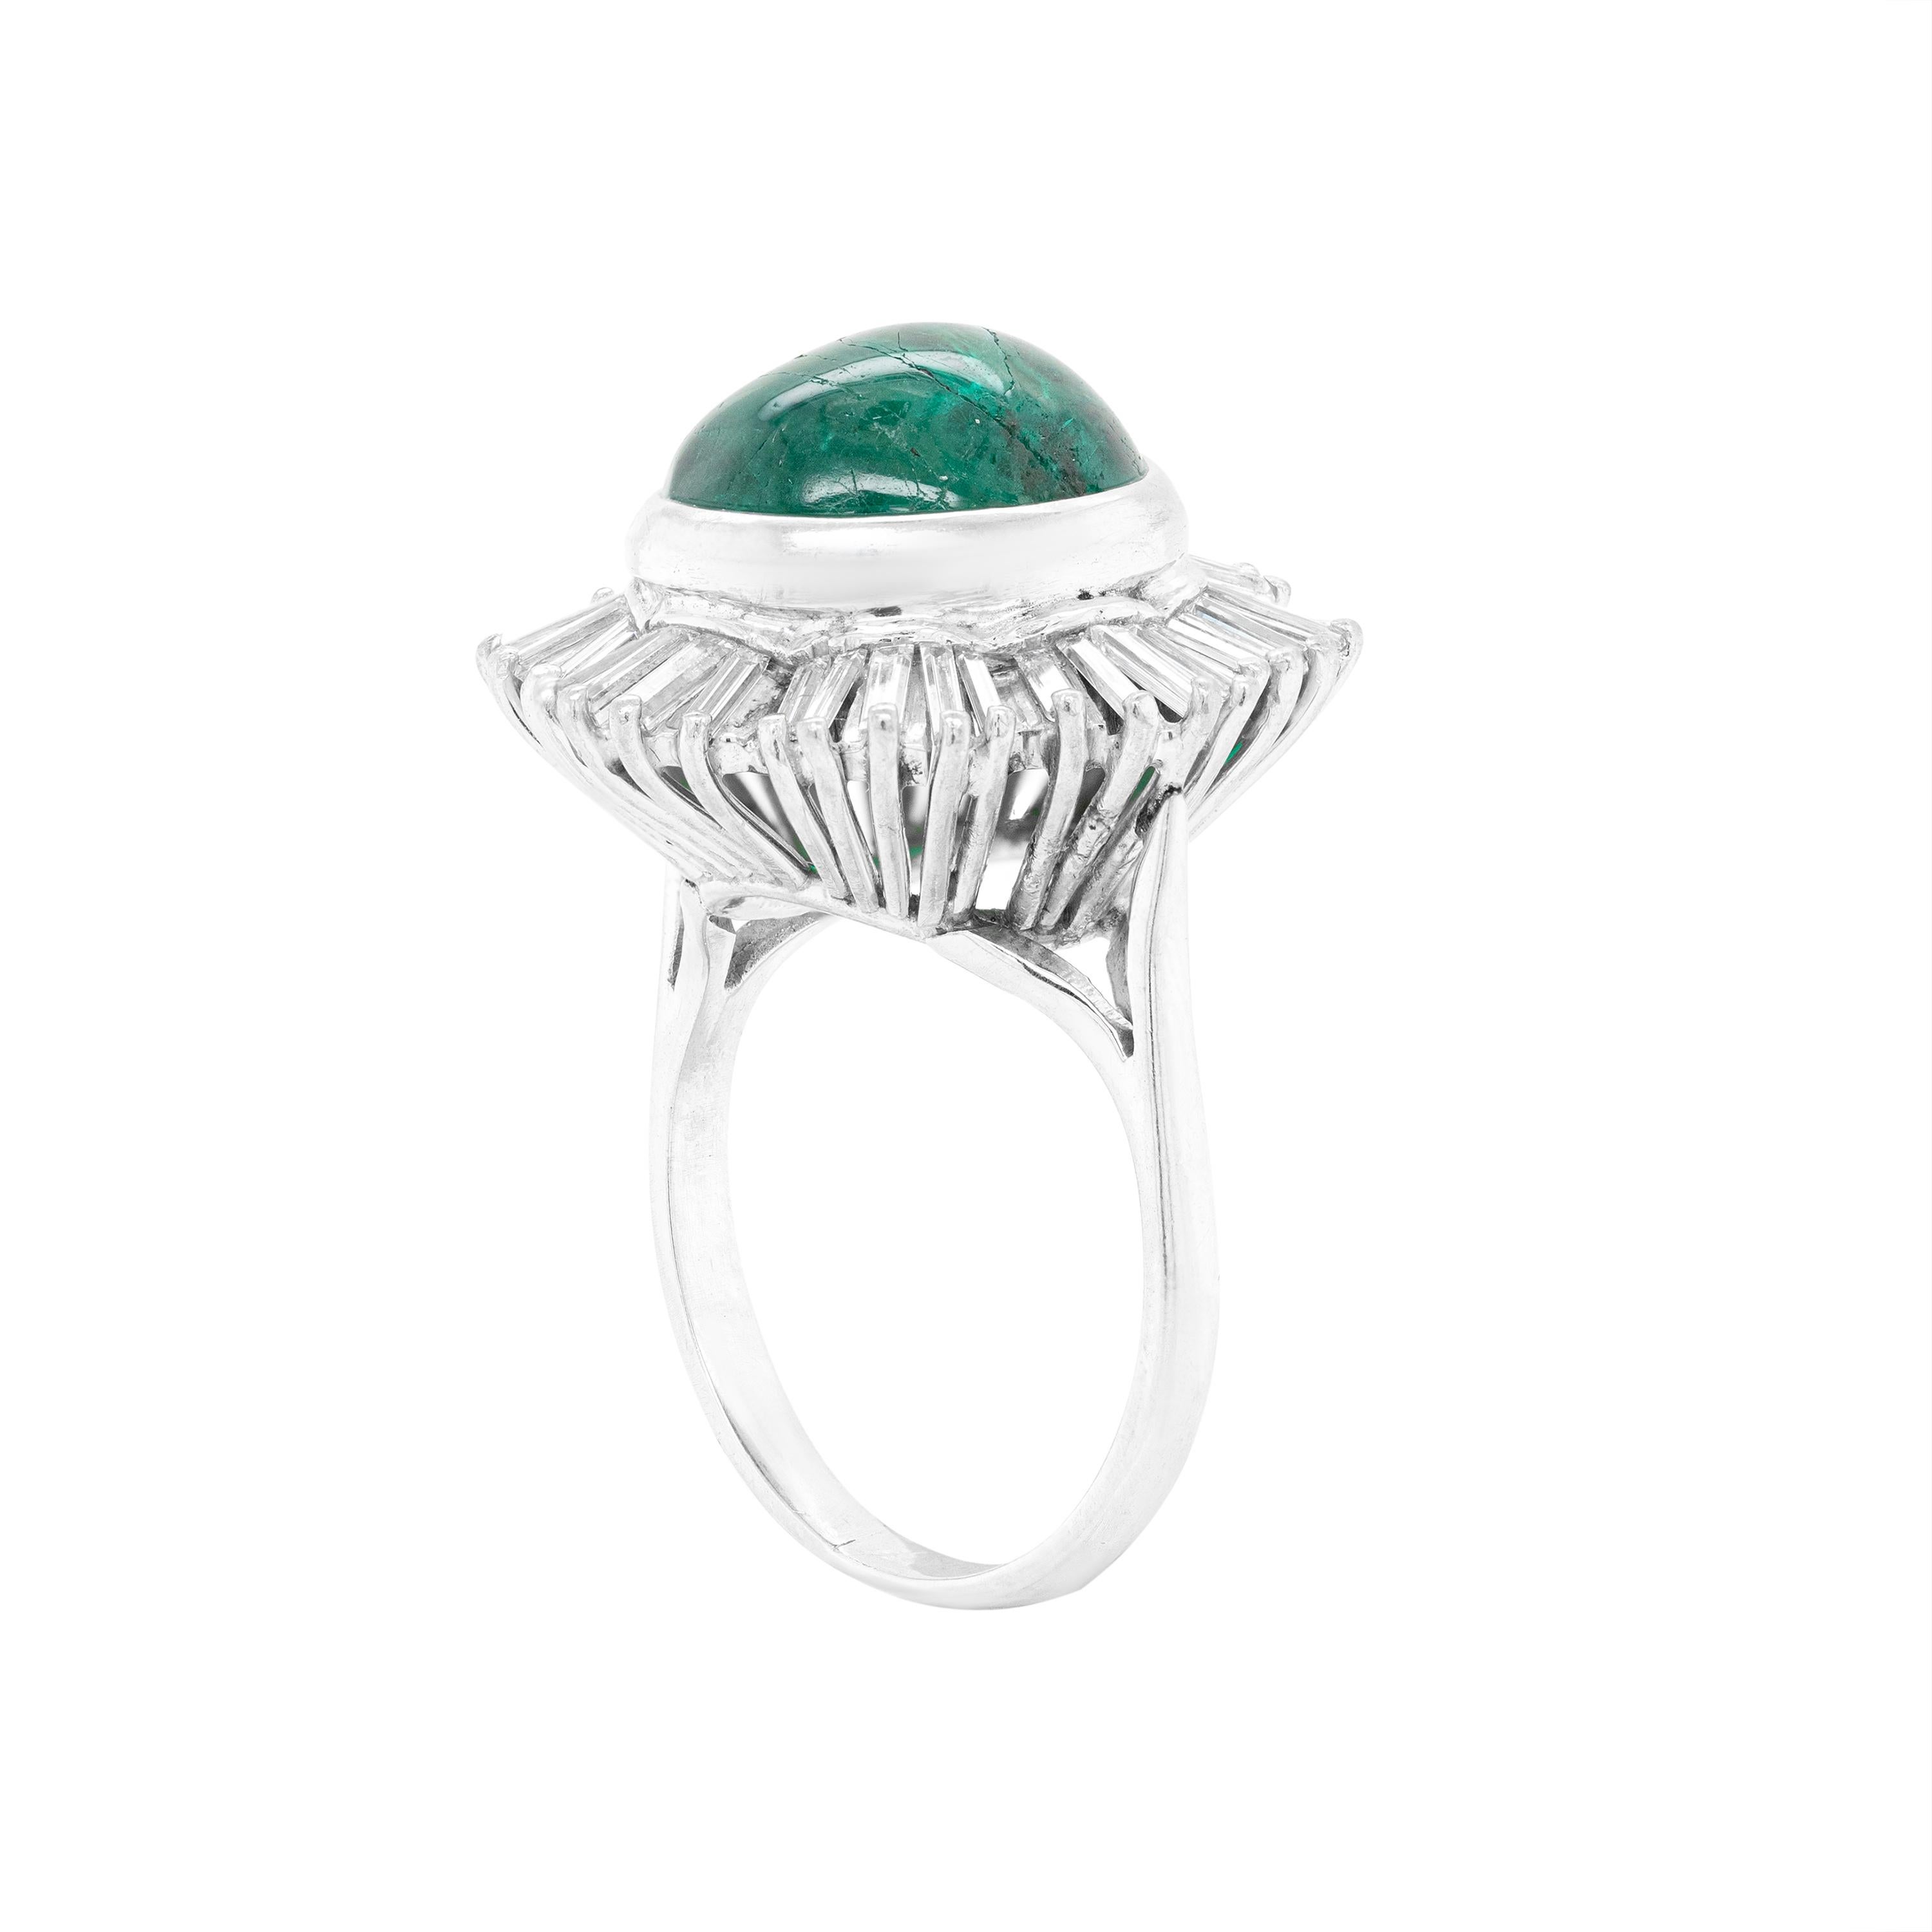 This wonderful dress ring features a vibrant cabouchon emerald weighing an impressive weight of approximately 10.00ct, rubover set in an 18 carat white gold, open back setting. The centre stone is beautifully surrounded by 40 baguette cut diamonds